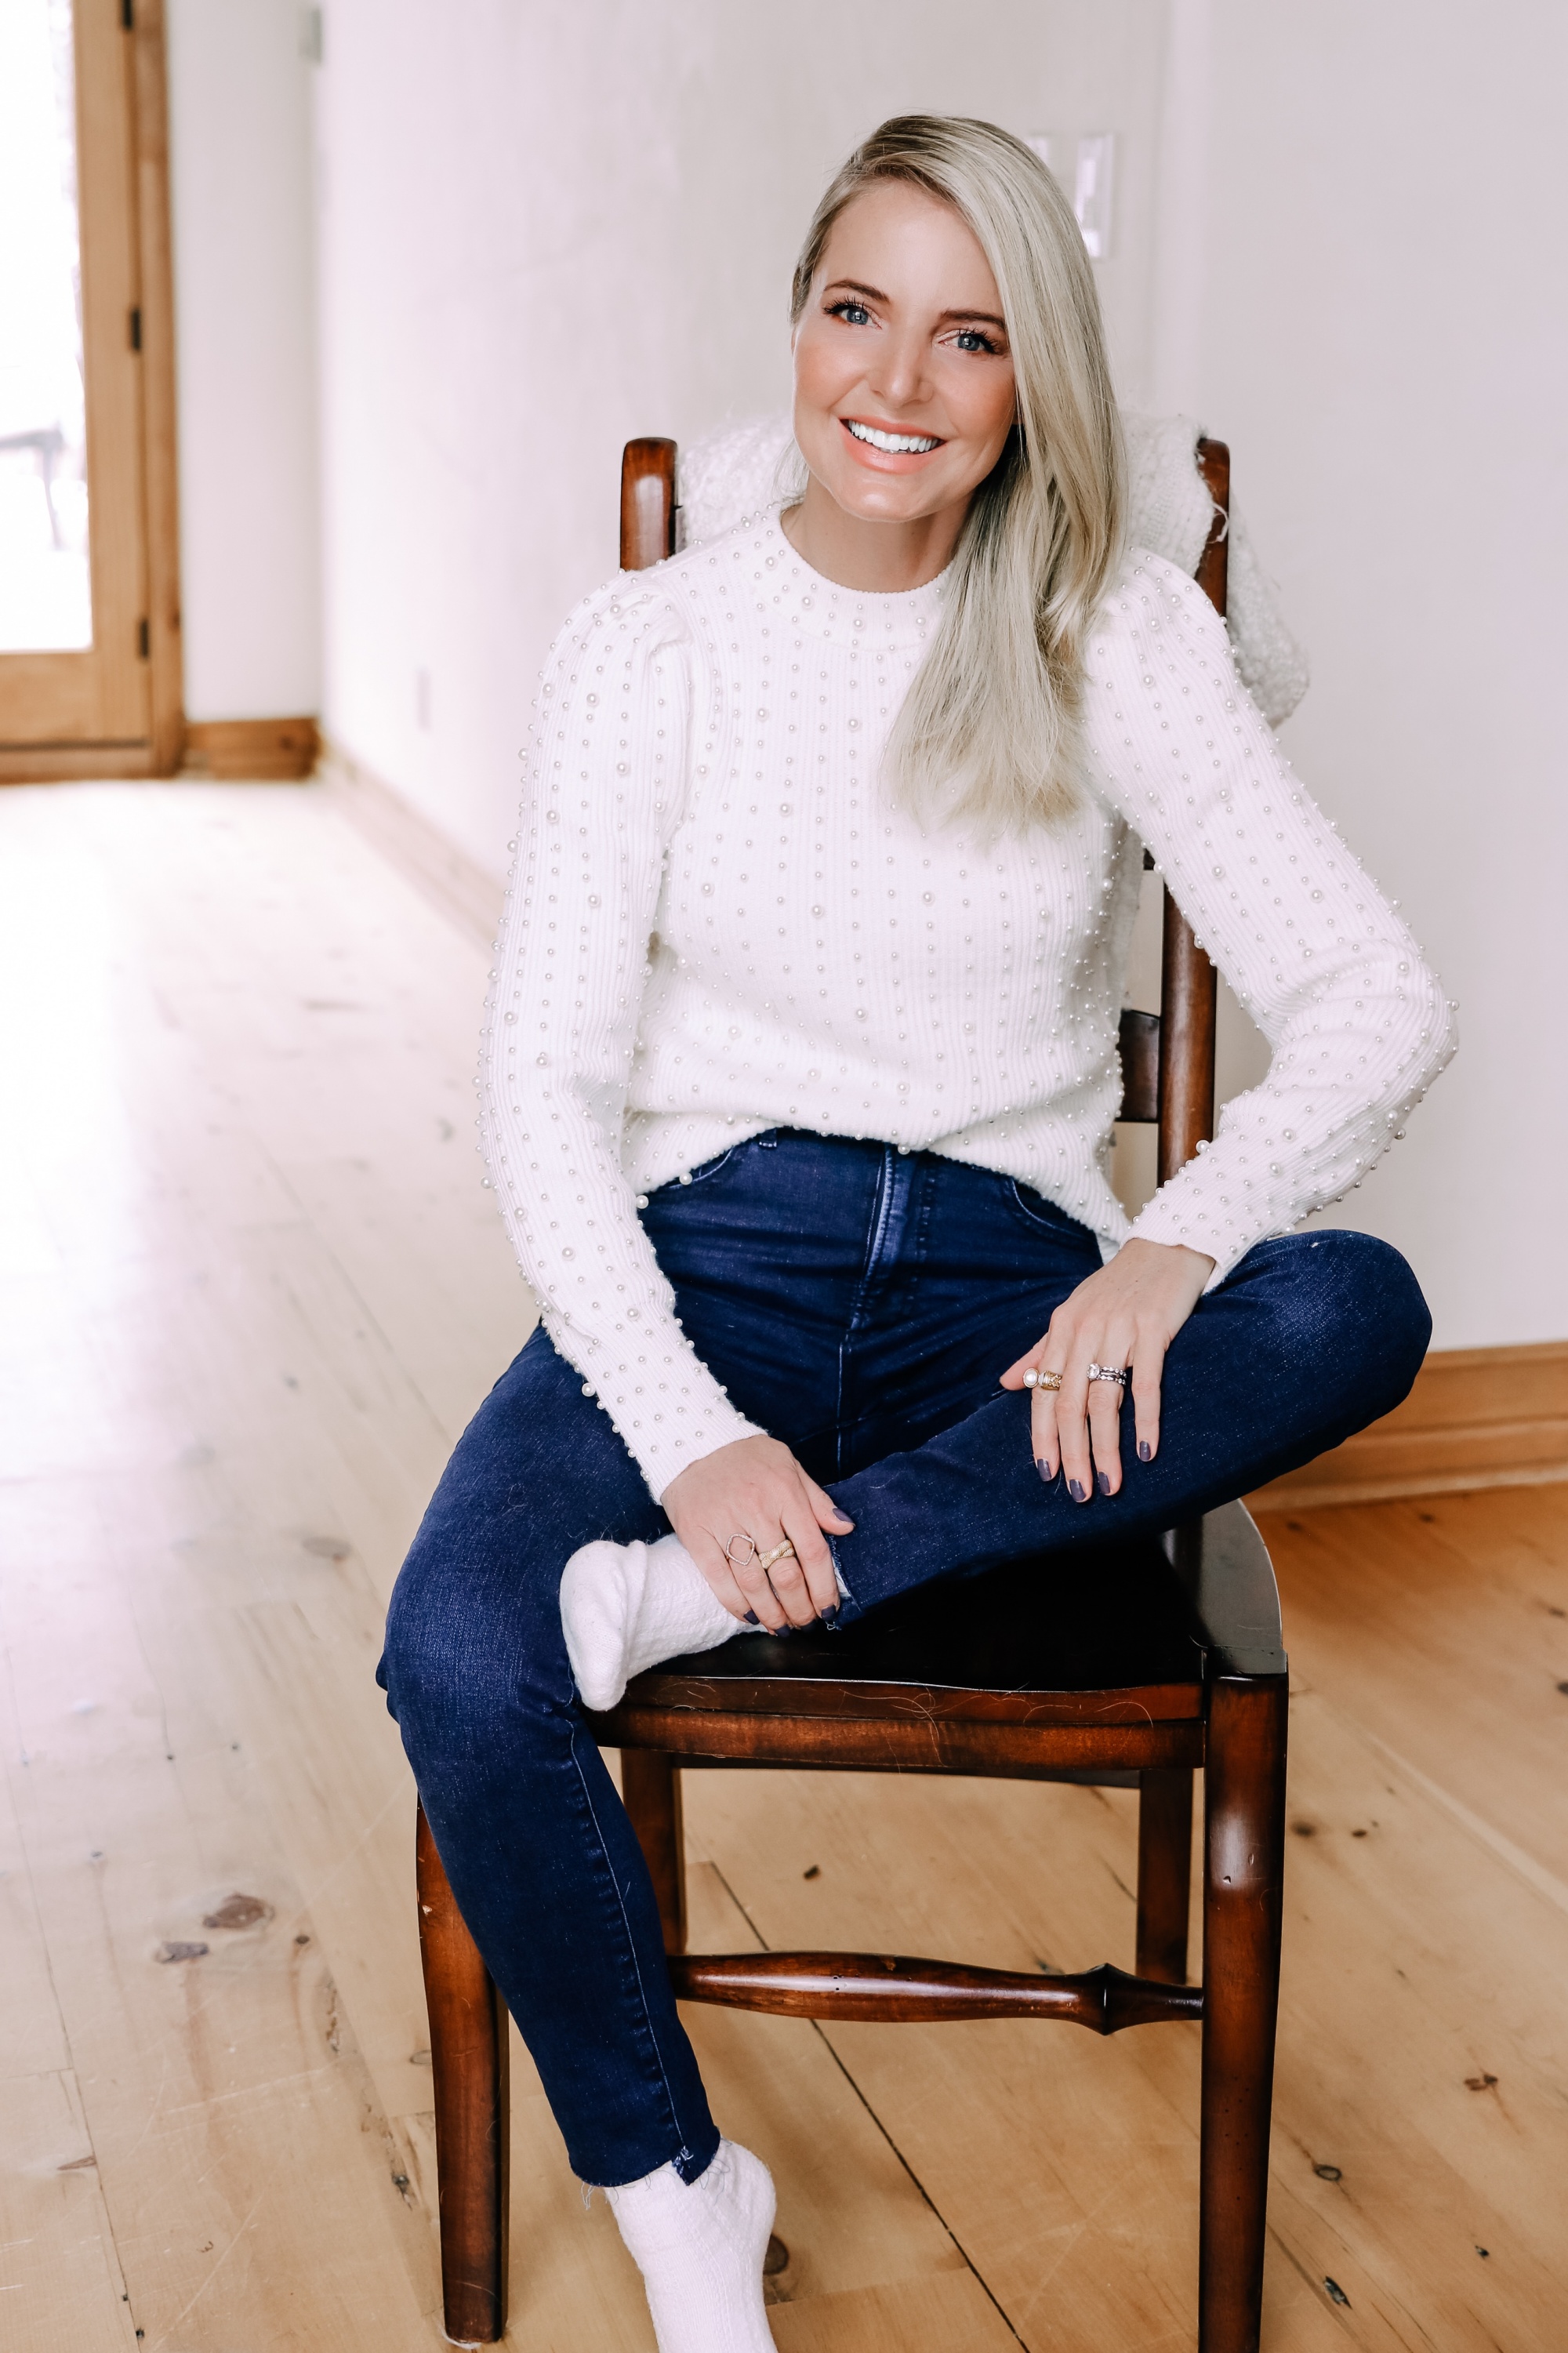 Black Friday Doorbuster, Erin Busbee of Busbee Style wearing a pearl embellished white sweater, raw step hem jeans, and cozy socks from Express in Telluride, Colorado